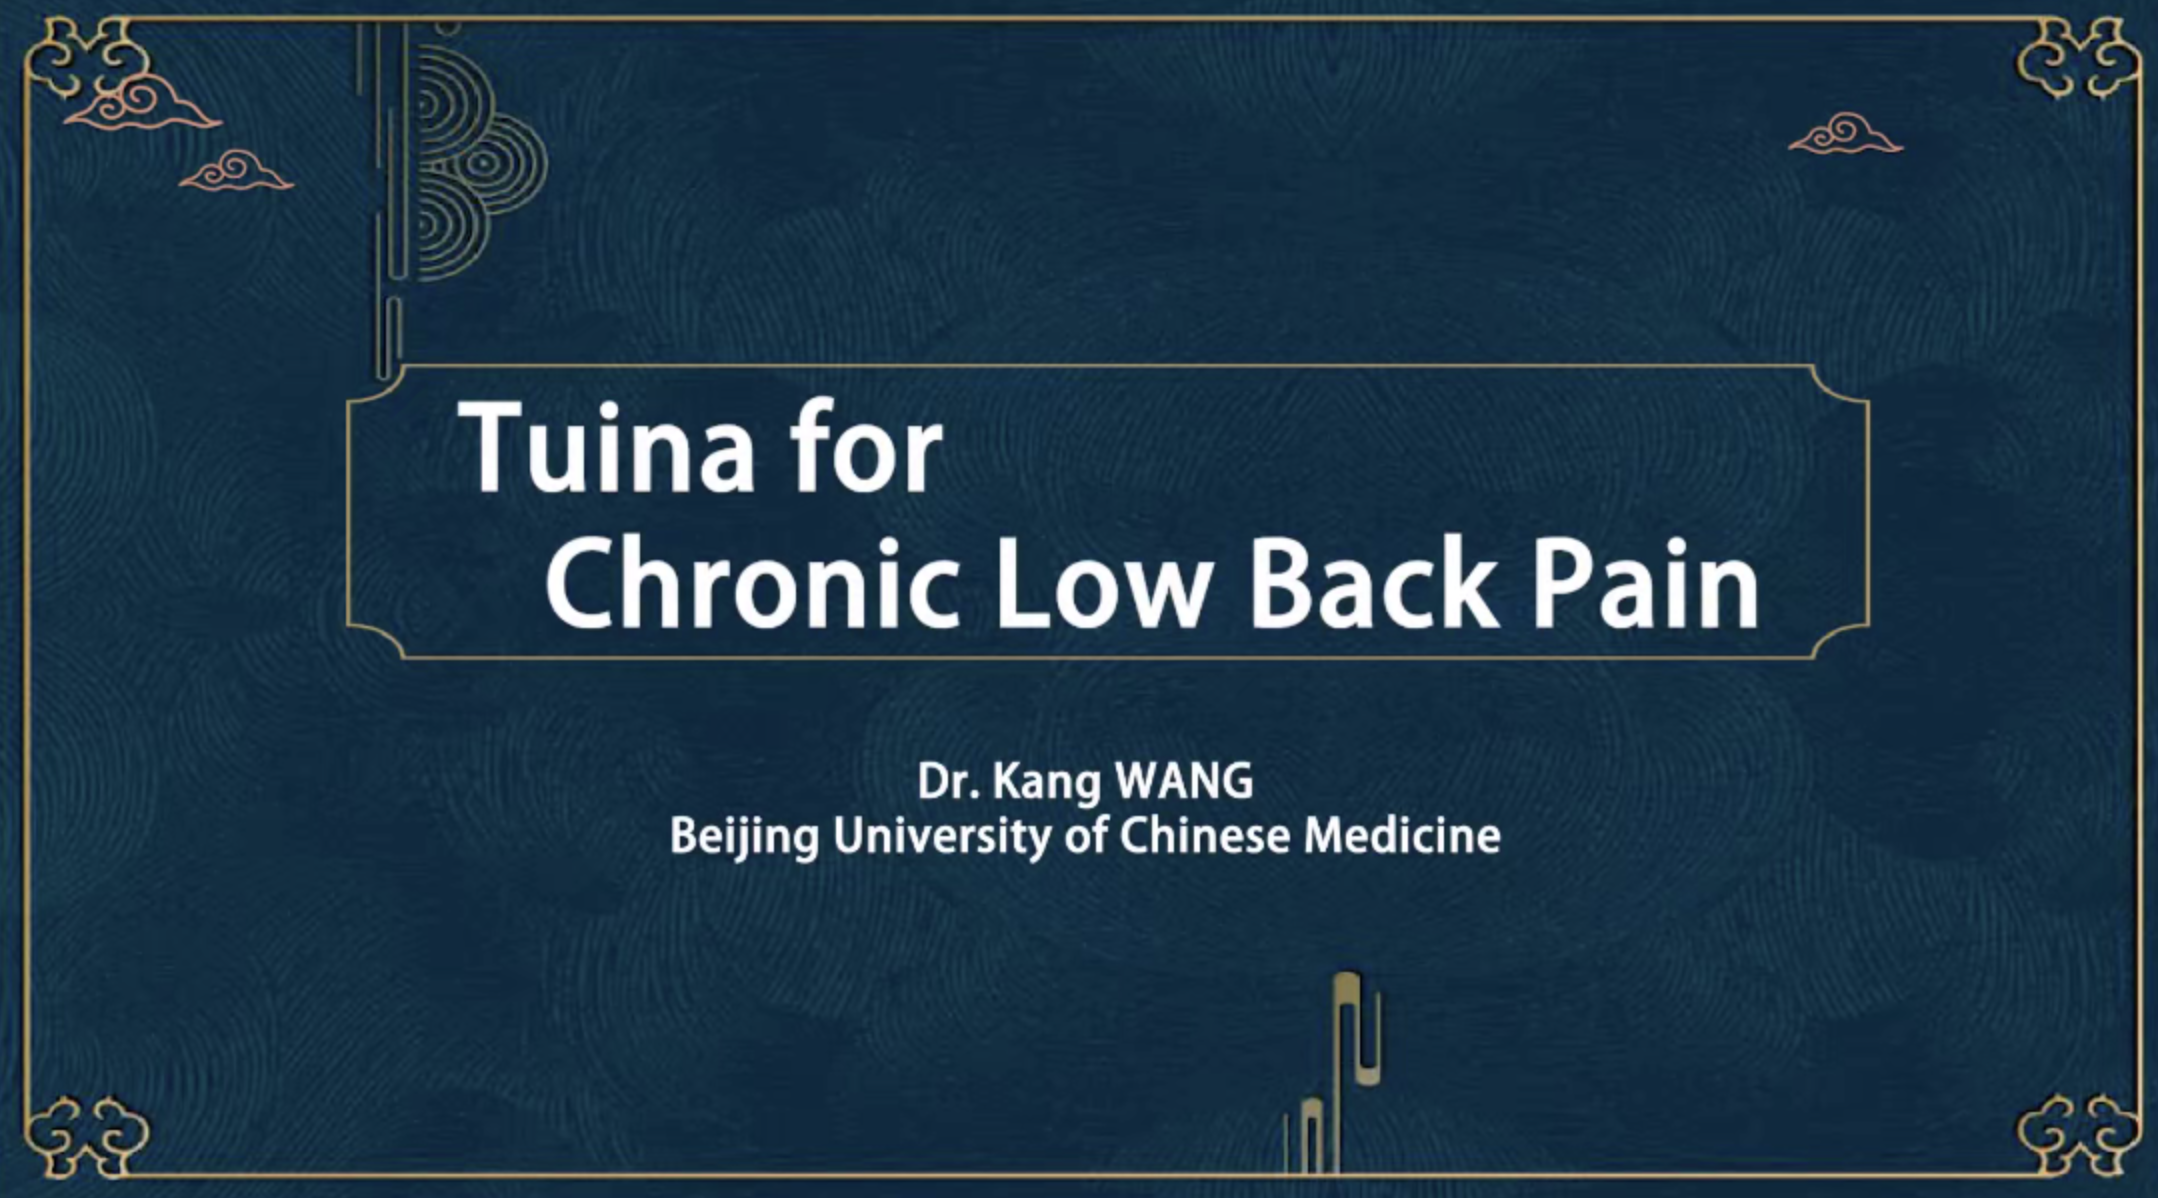 Wang kang+Tuina for Chronic Low Back Pain in TCM